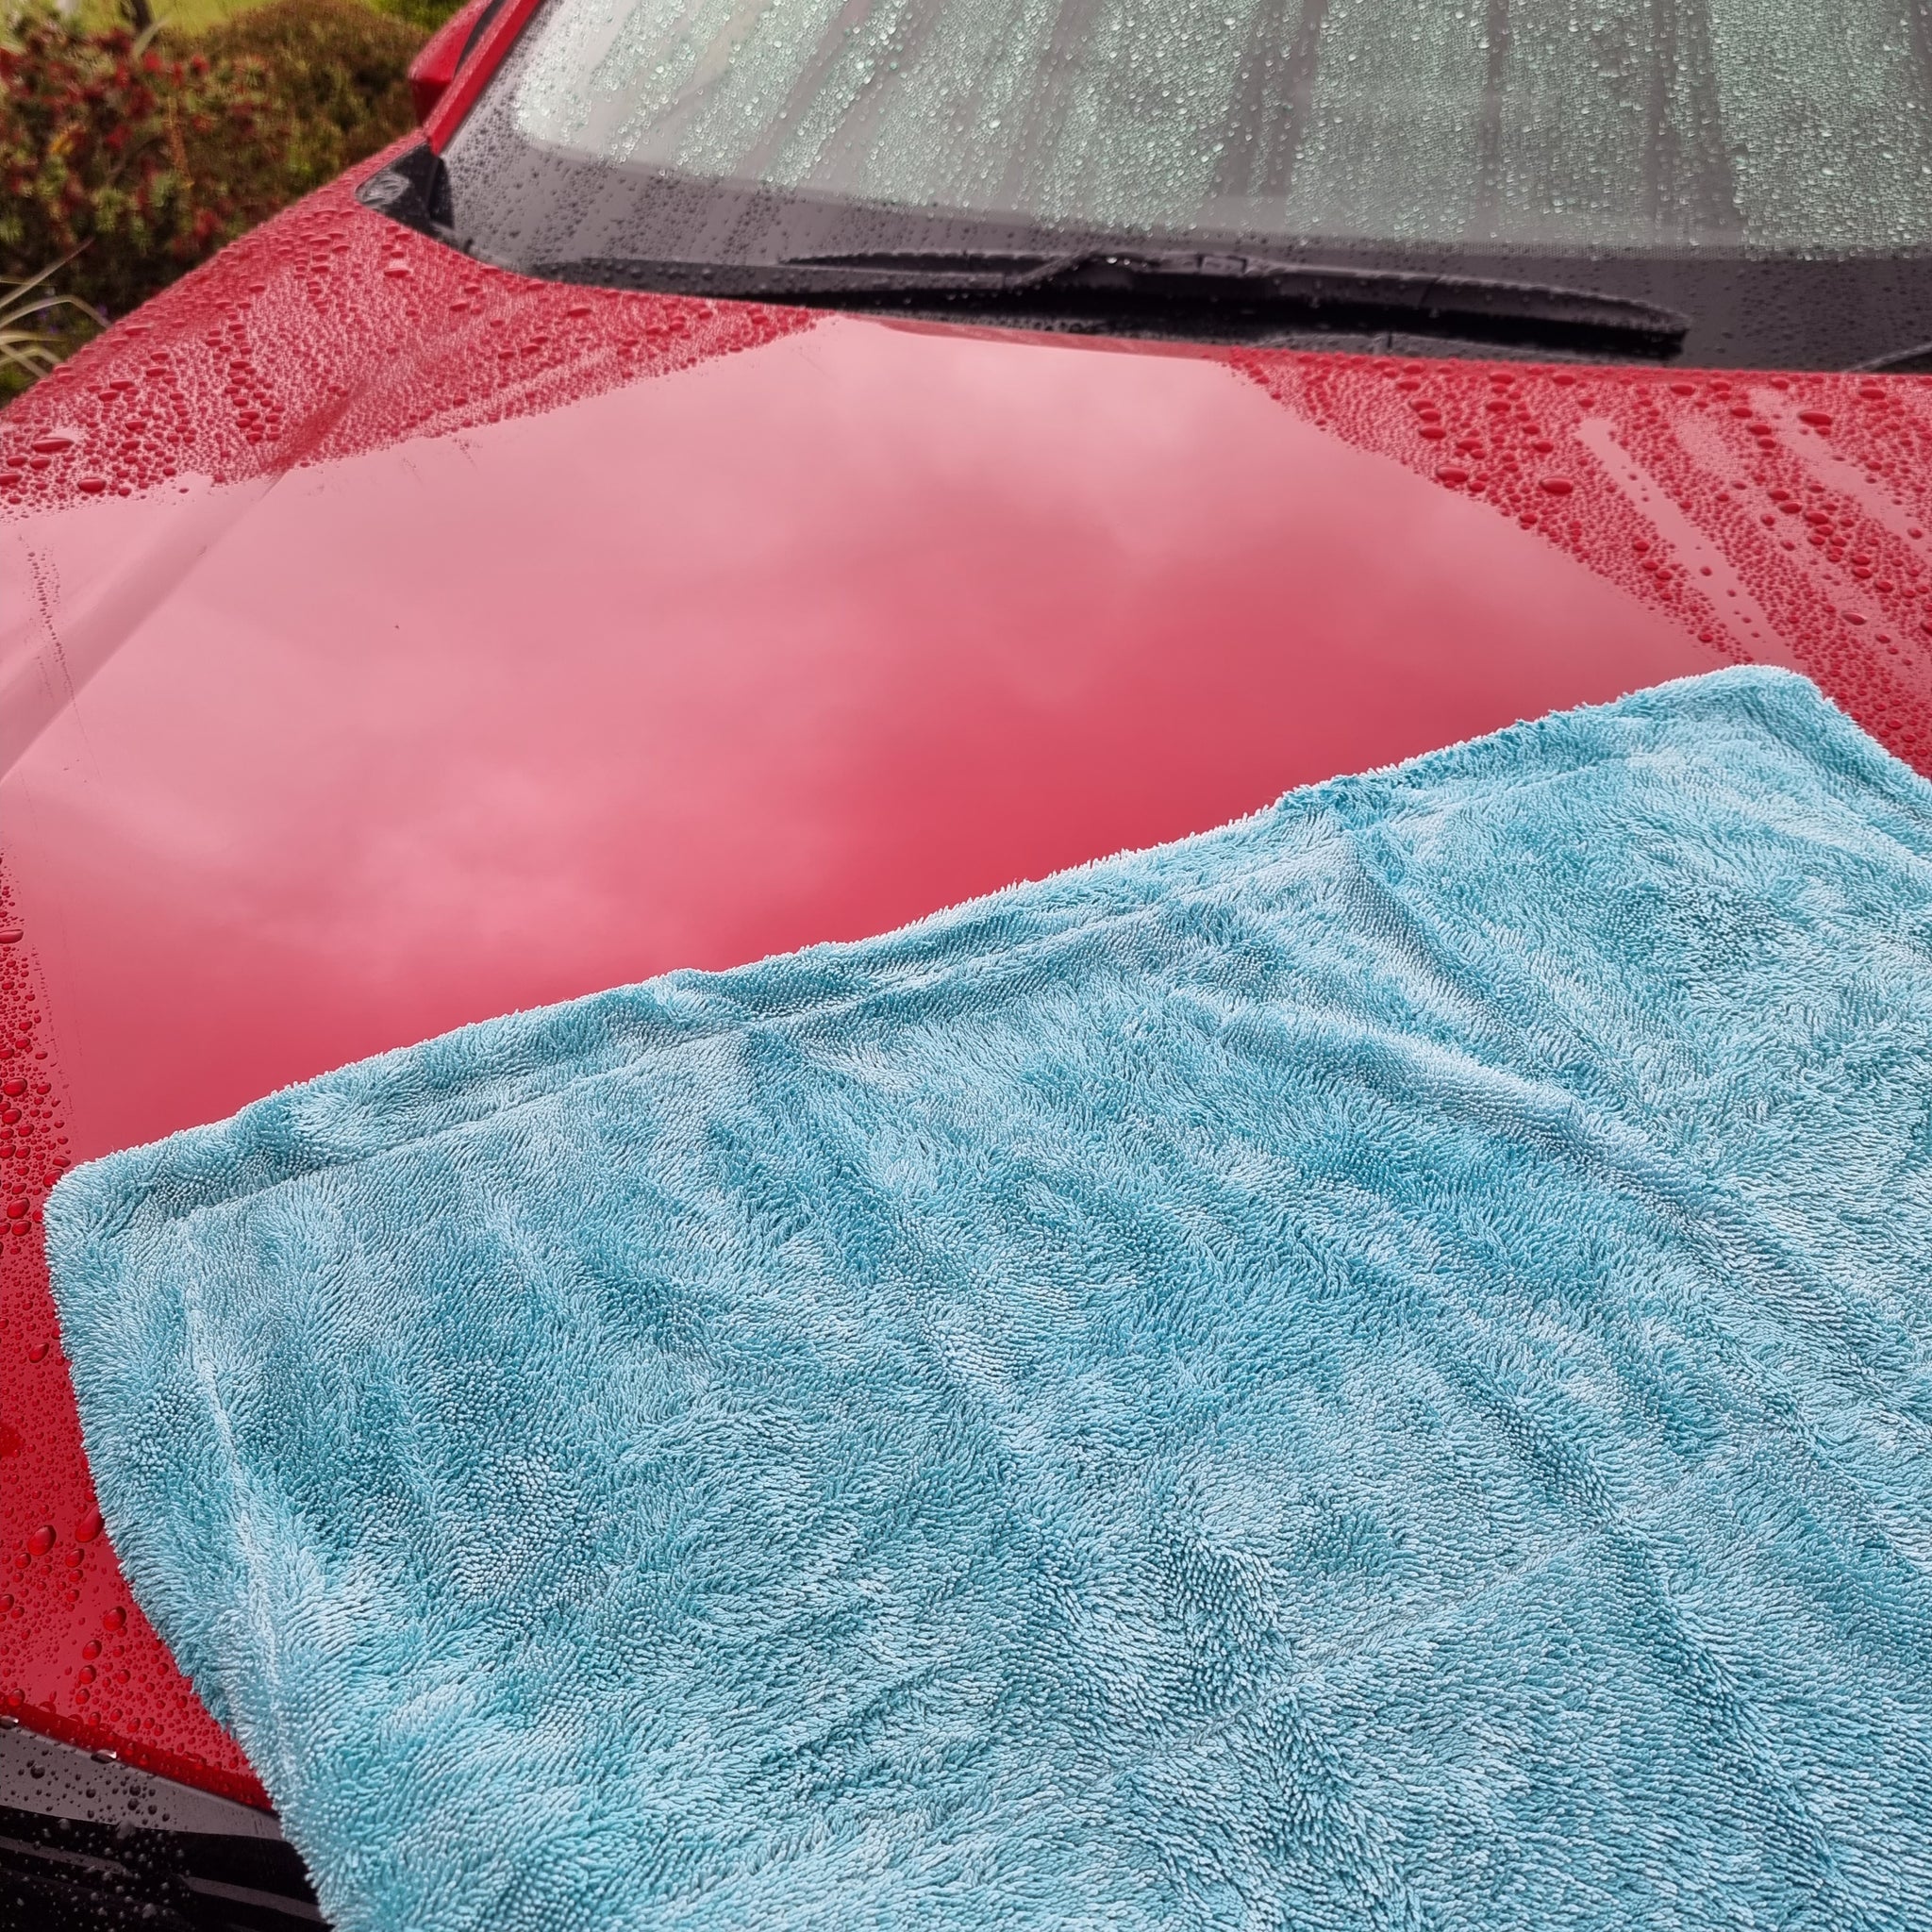 We love the new Rockcar Performer Drying towel!